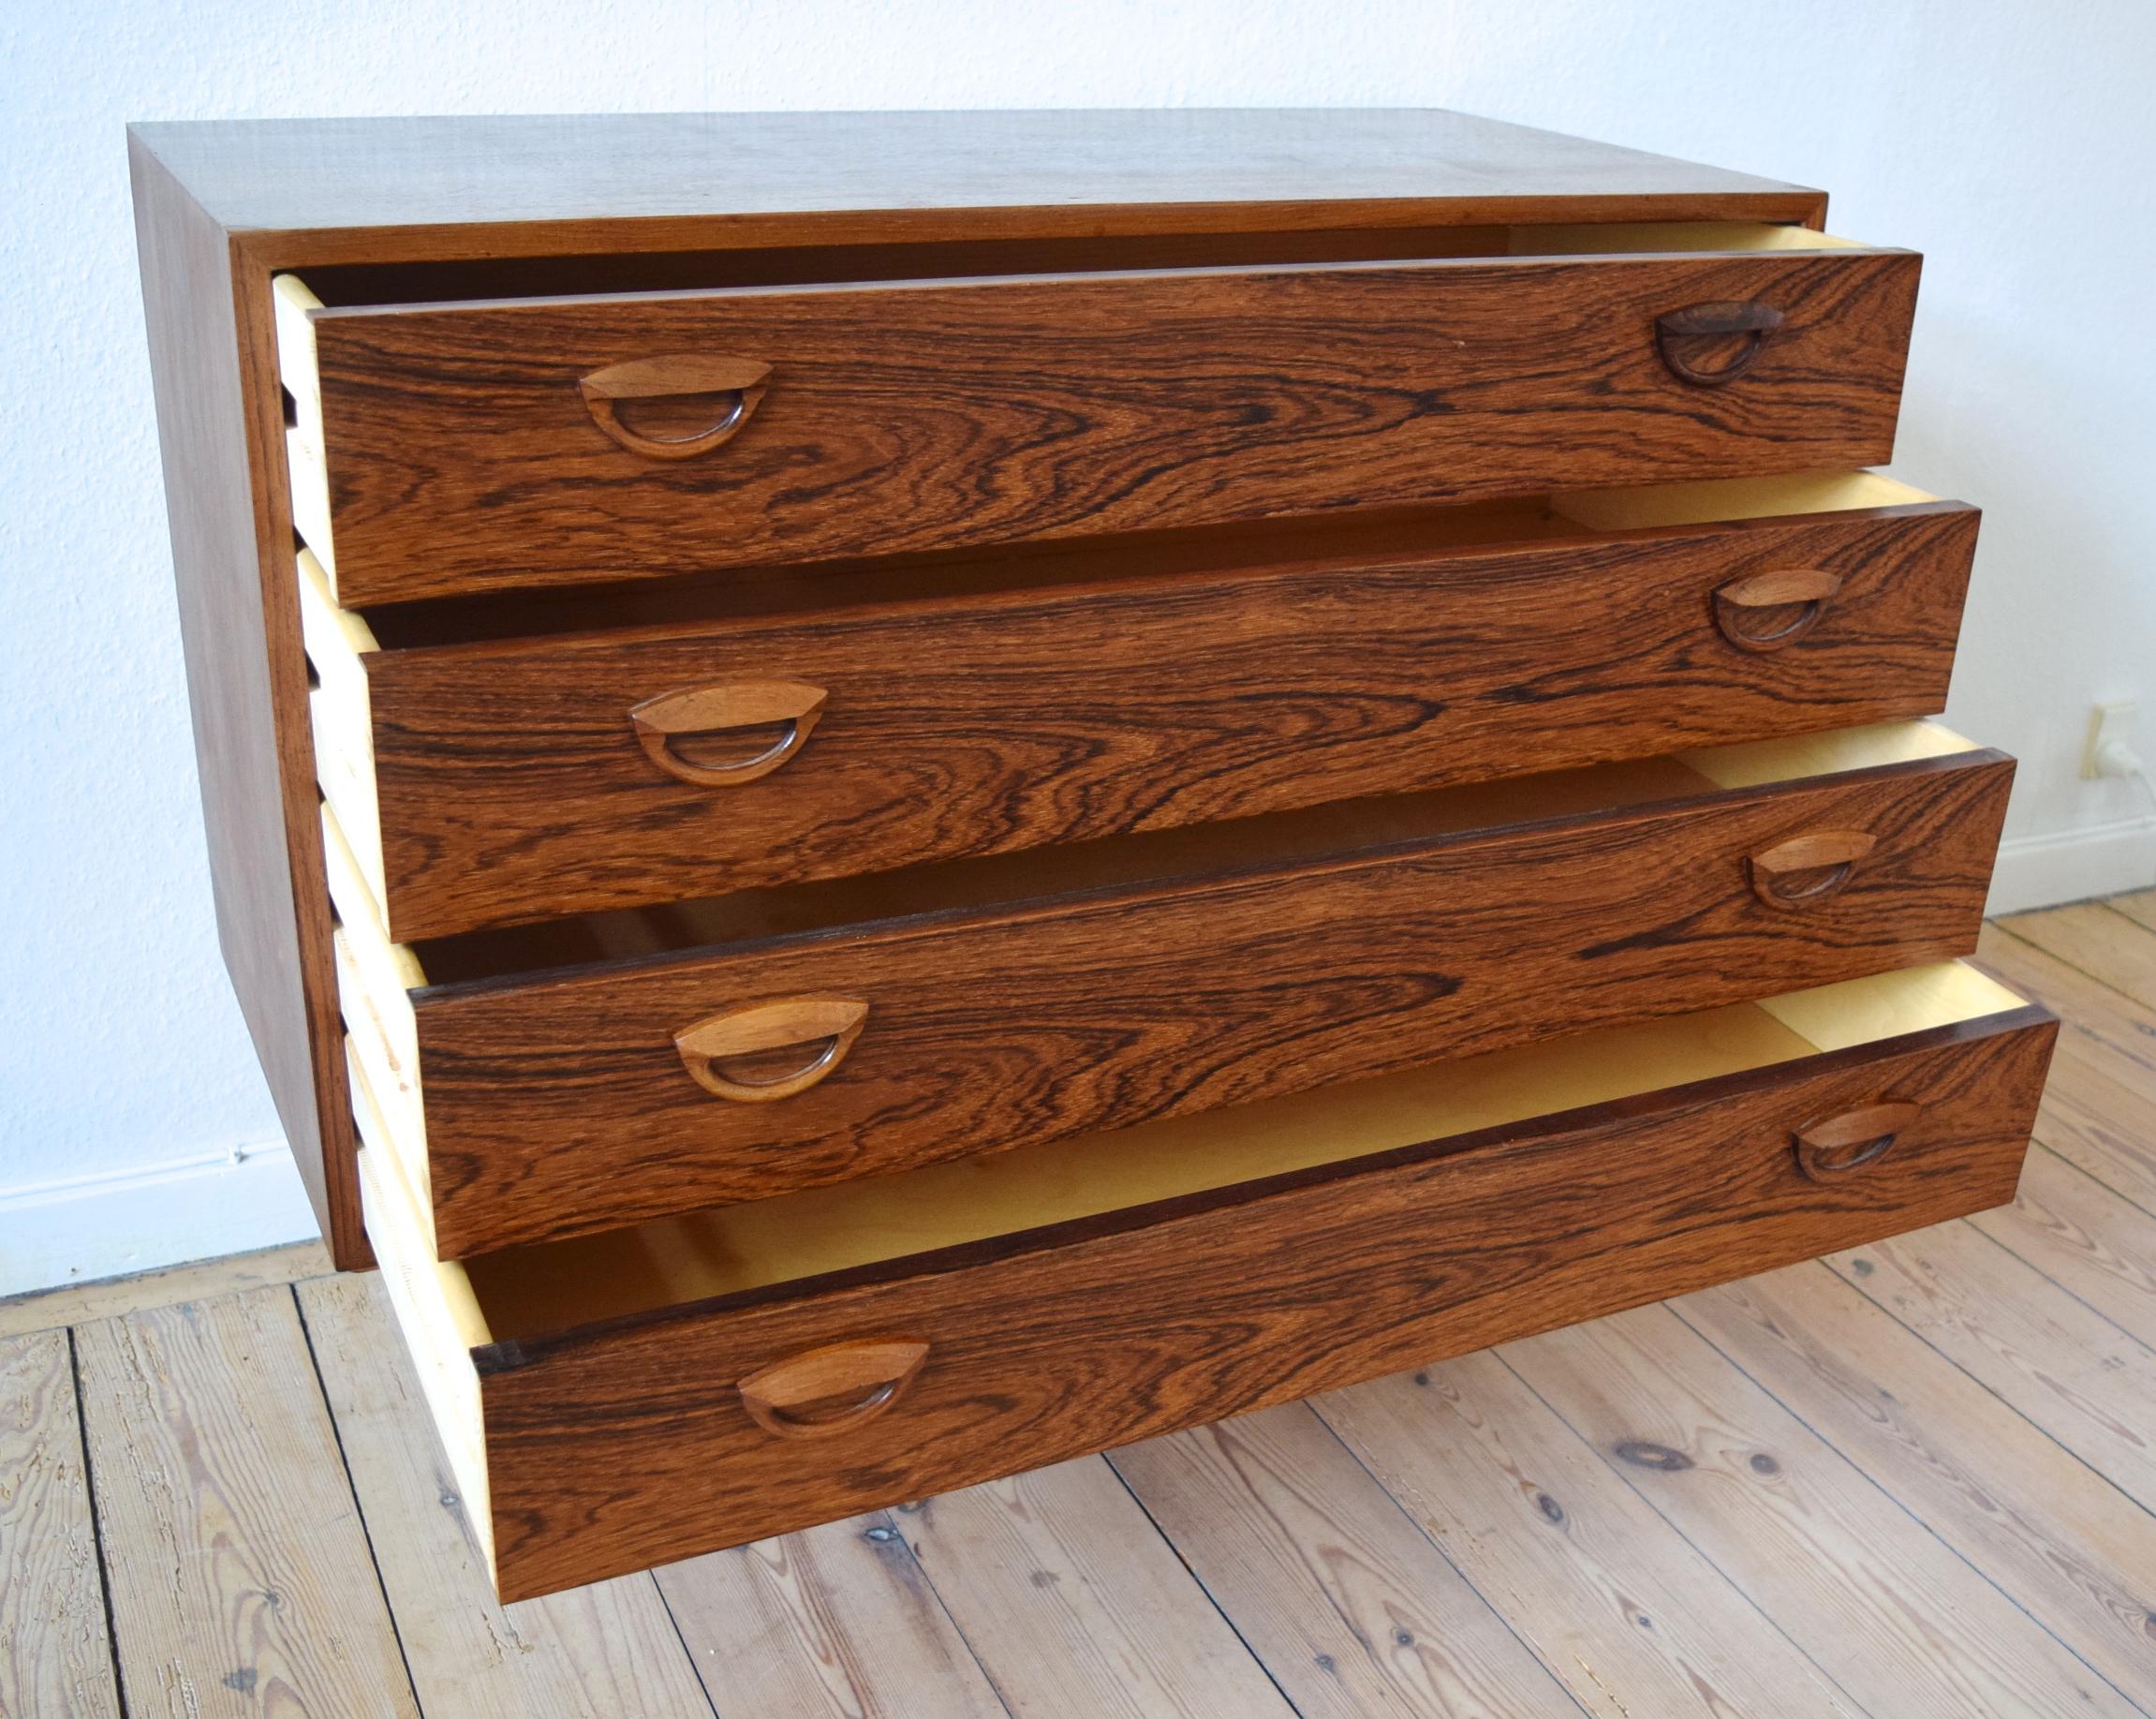 Kai Kristiansen Rosewood Chest of Drawers, 1960s In Good Condition For Sale In Nyborg, DK